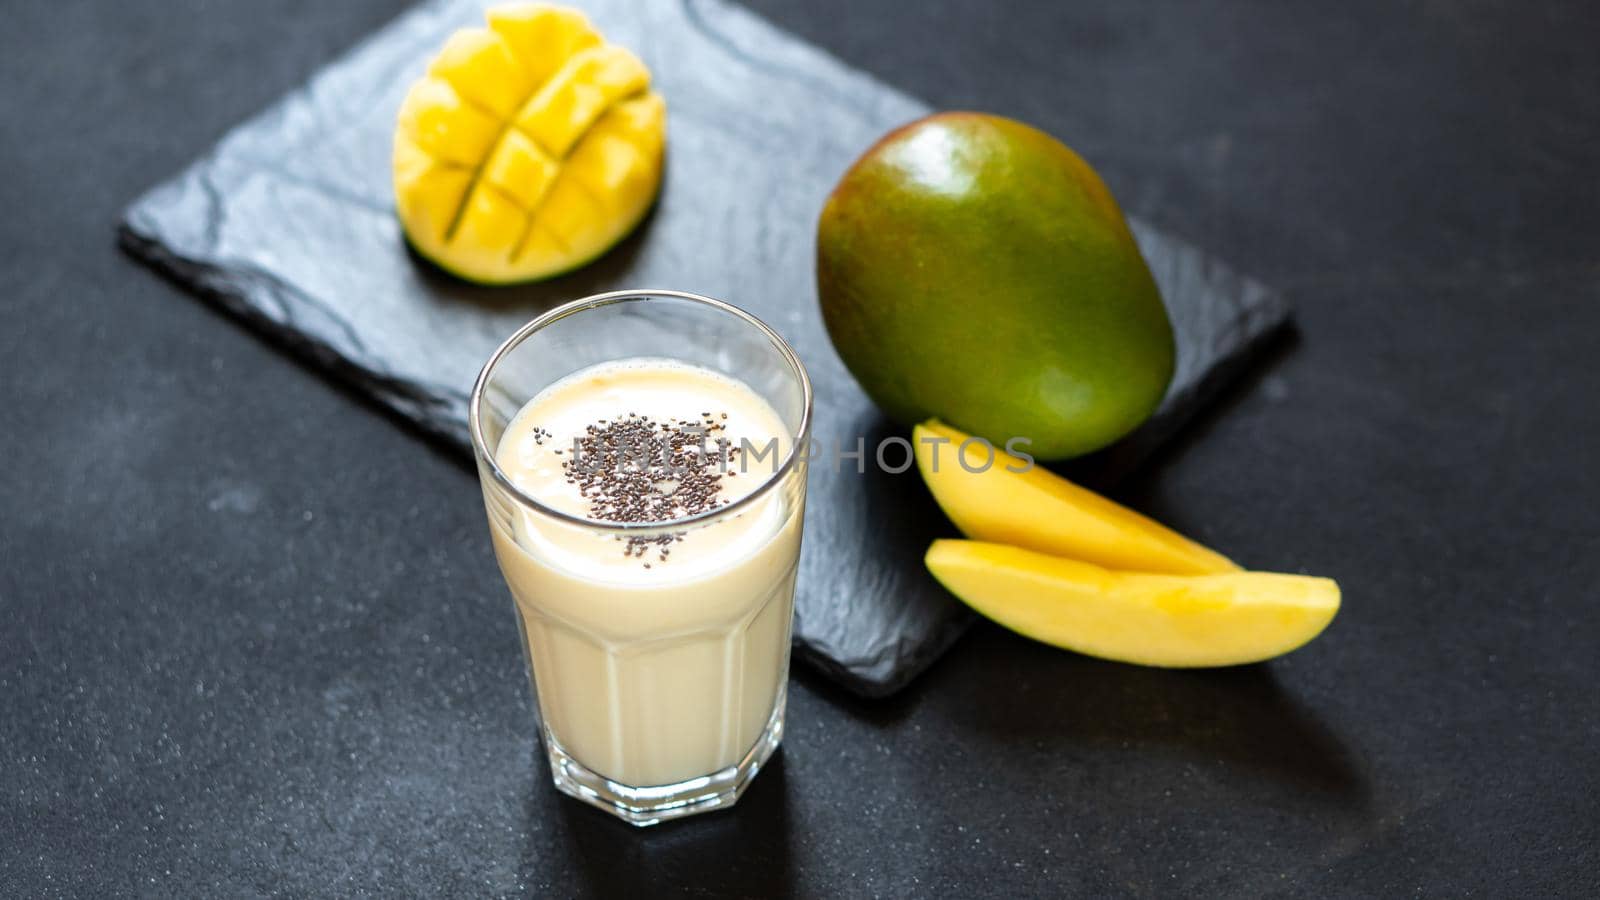 Cool mango milkshake on a black background. A drink to quench your thirst in the summer. Indian cuisine classic drink - Lassi. Milk, yogurt with mango chunks by gulyaevstudio